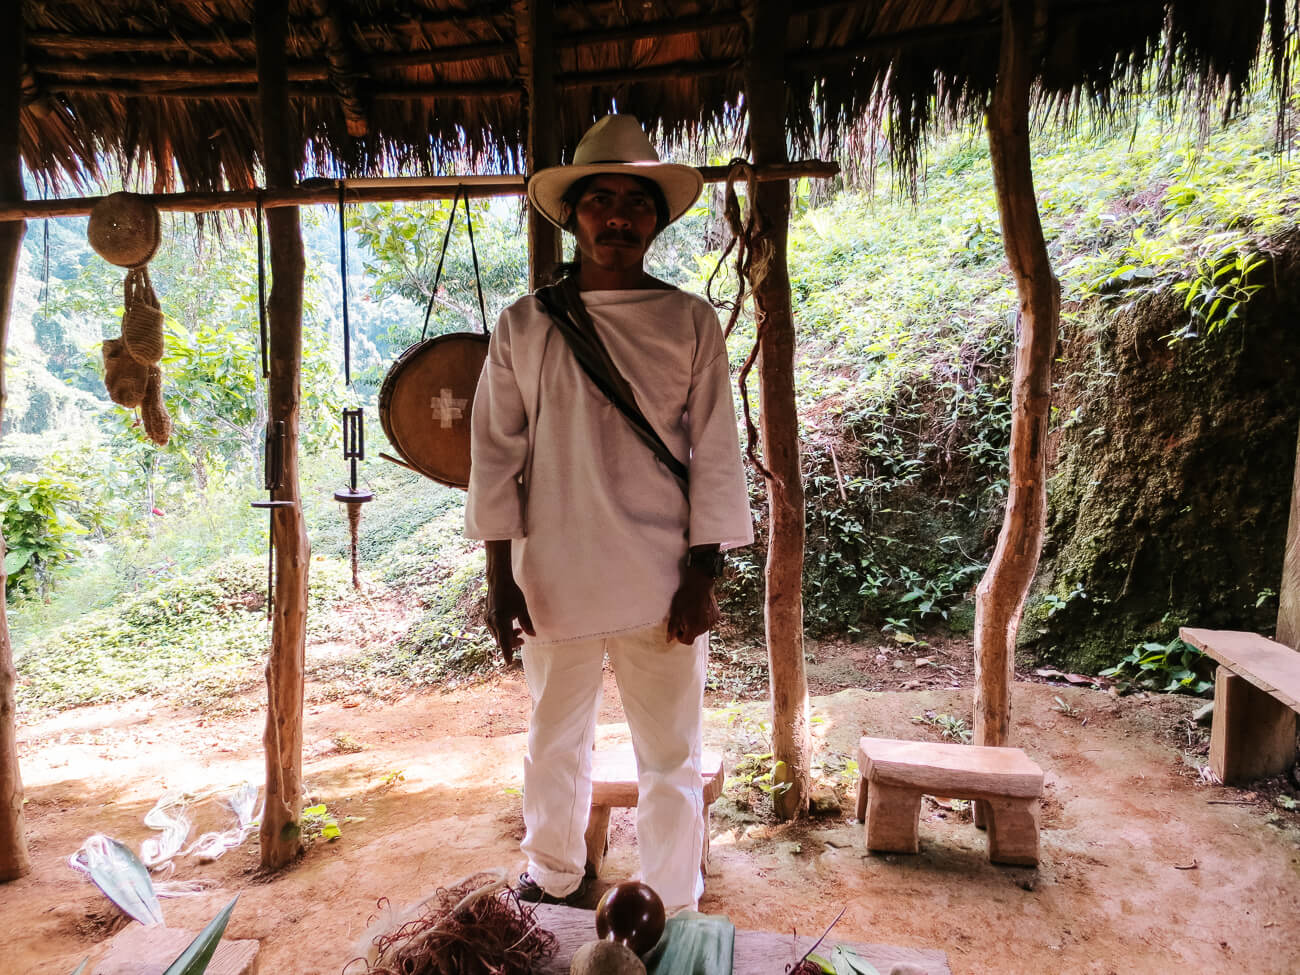 During te Lost city trek you pass villages and get an explanation from one of the leaders about life in the Sierra Nevada, including local traditions and customs. 